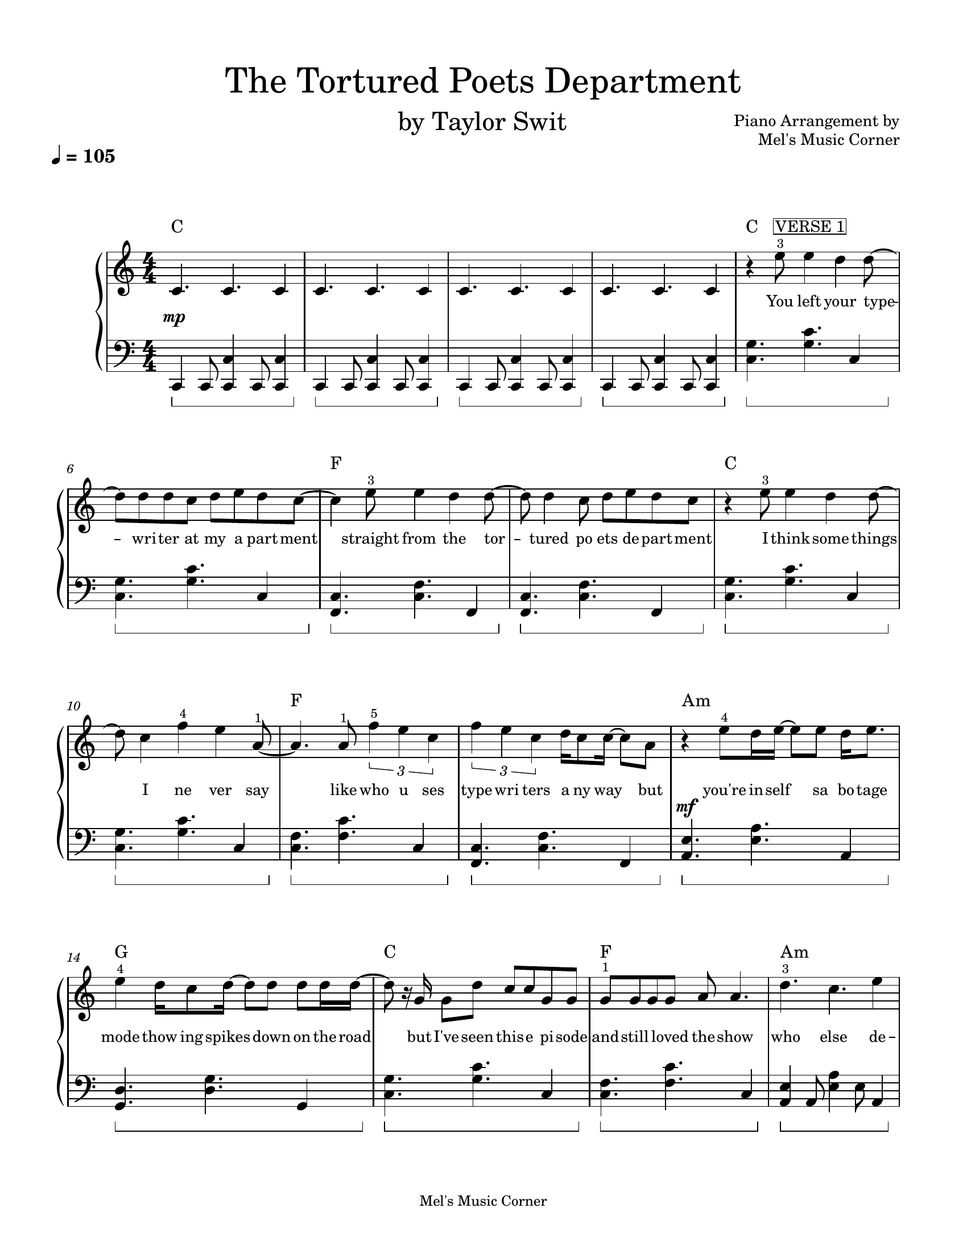 Taylor Swift - The Tortured Poets Department (piano sheet music) by Mel's Music Corner